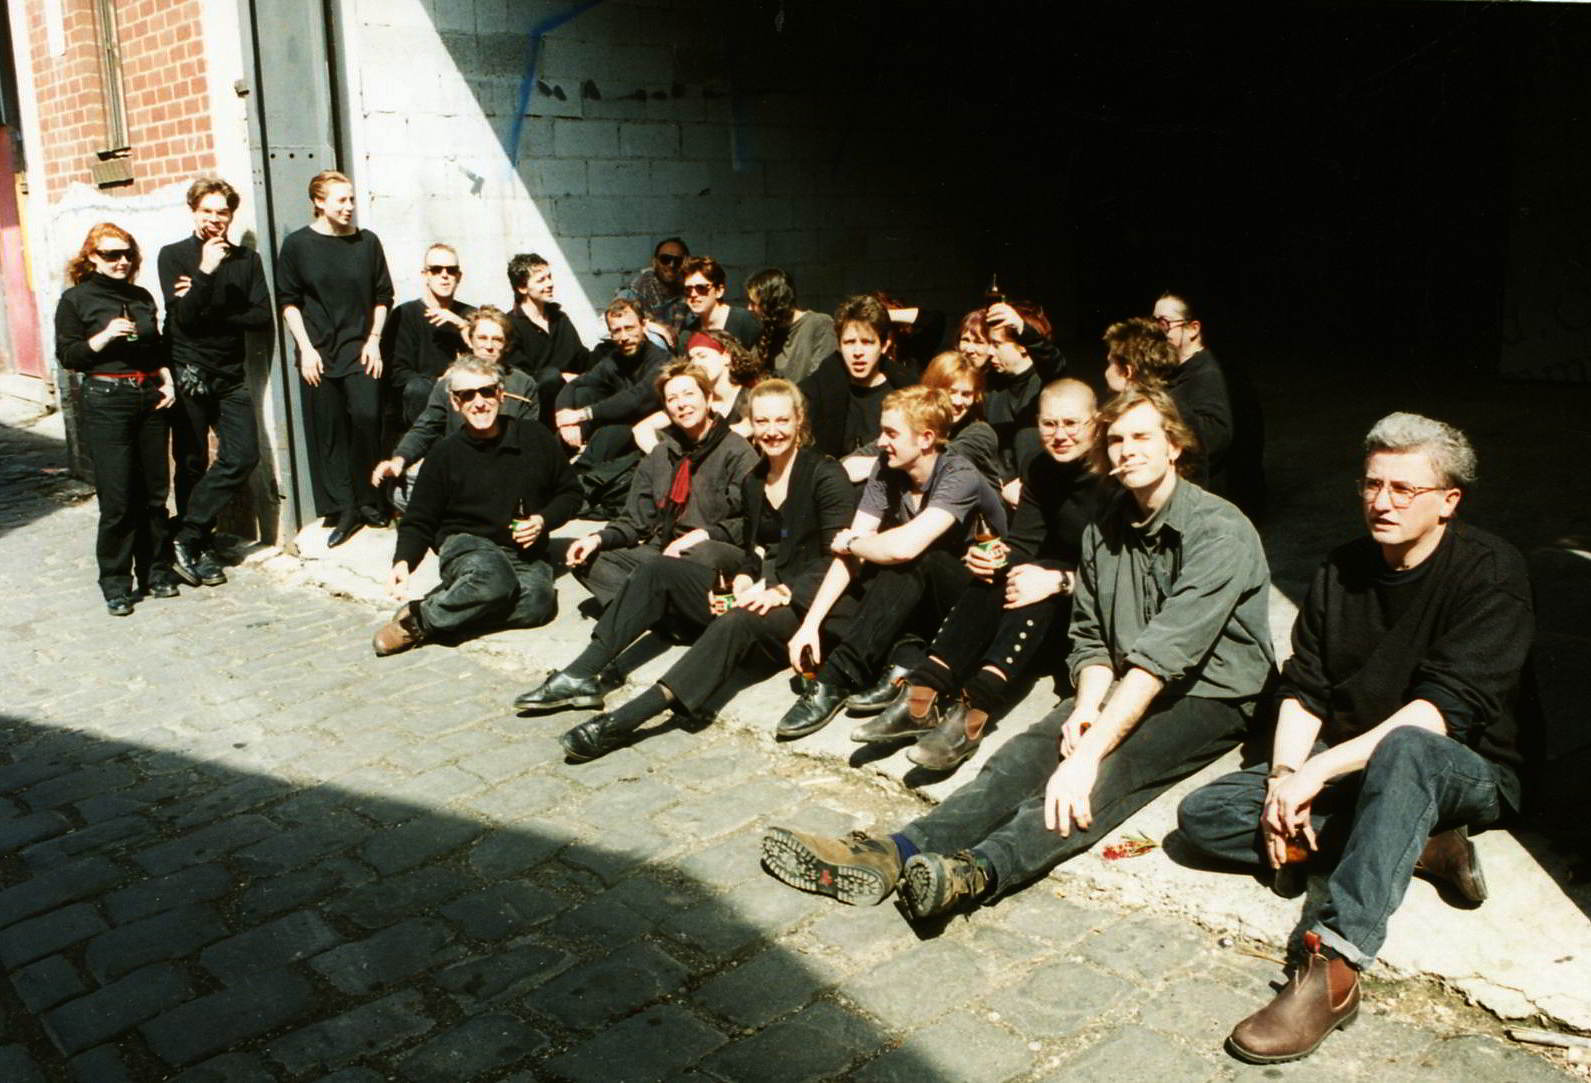 Held on the Breath of the Wind Handspan Theatre group portrait of performers sitting in a cobbled laneway